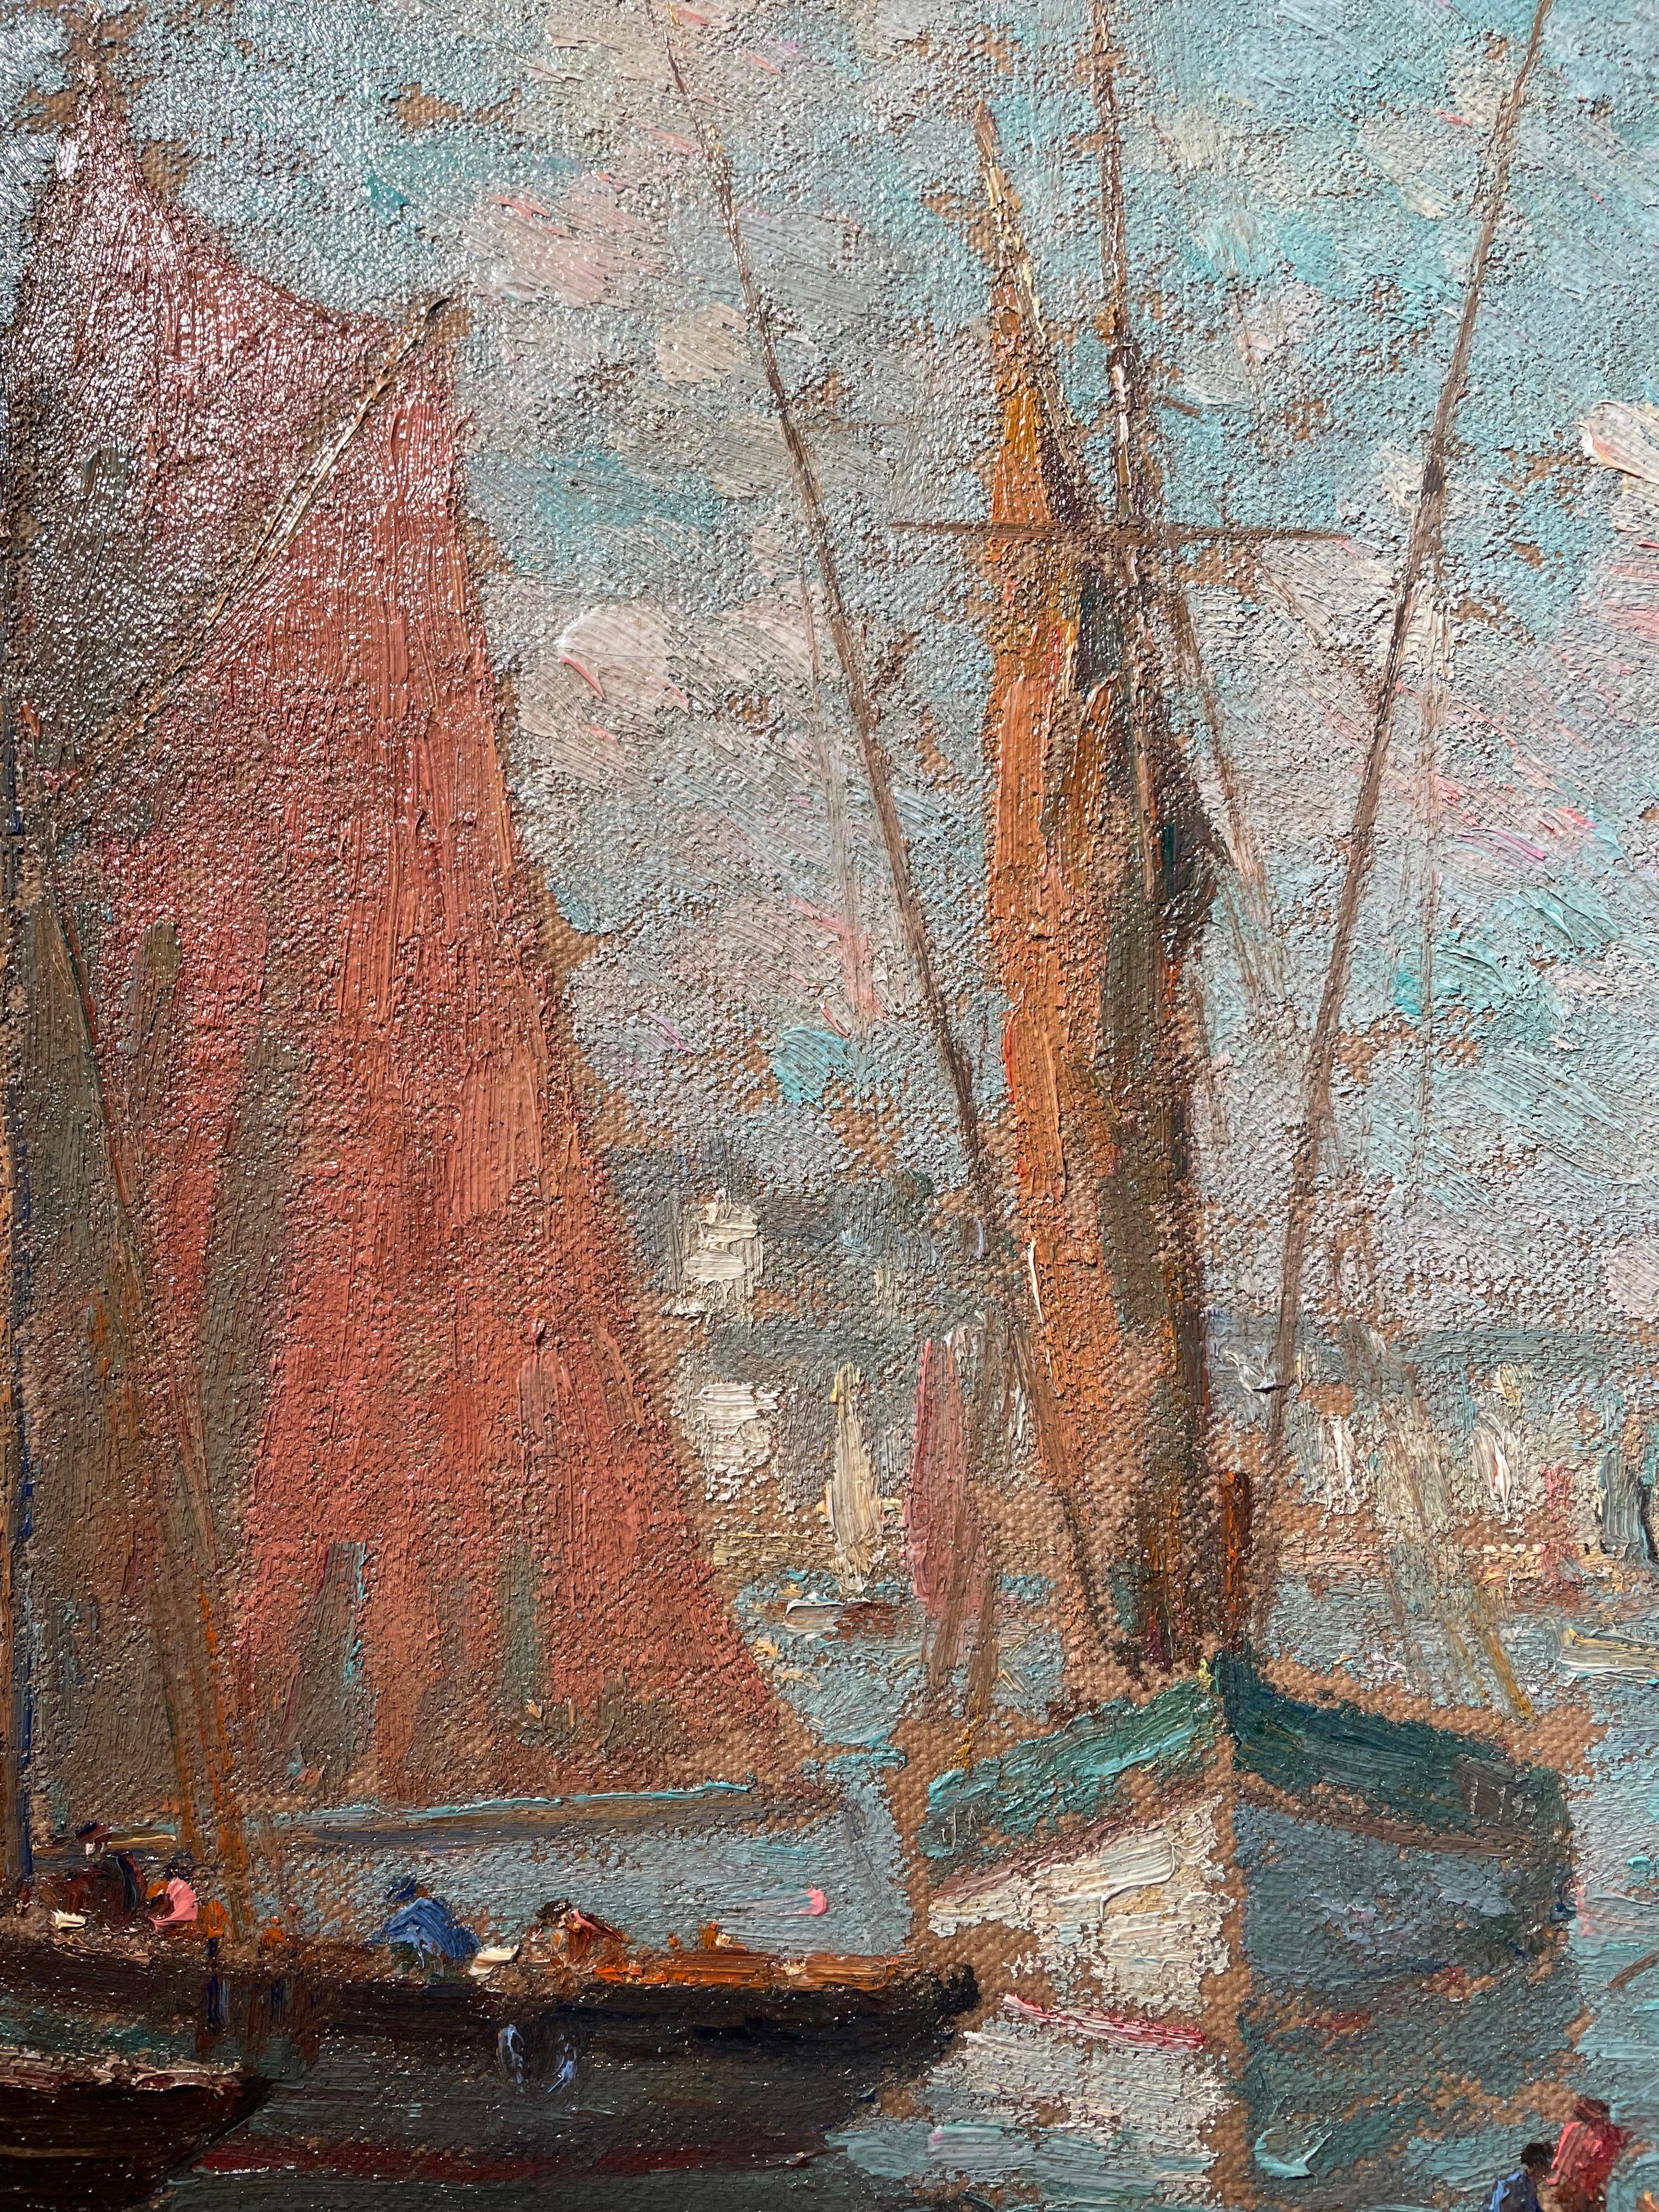 'Le Port' by Leon Bellemont. A beauitufl harbour scene of figures, boats and sails in a french Provence town. The colours are vibrant and bold. Reds, blues and touches of white. A perfect addition to any addition. 